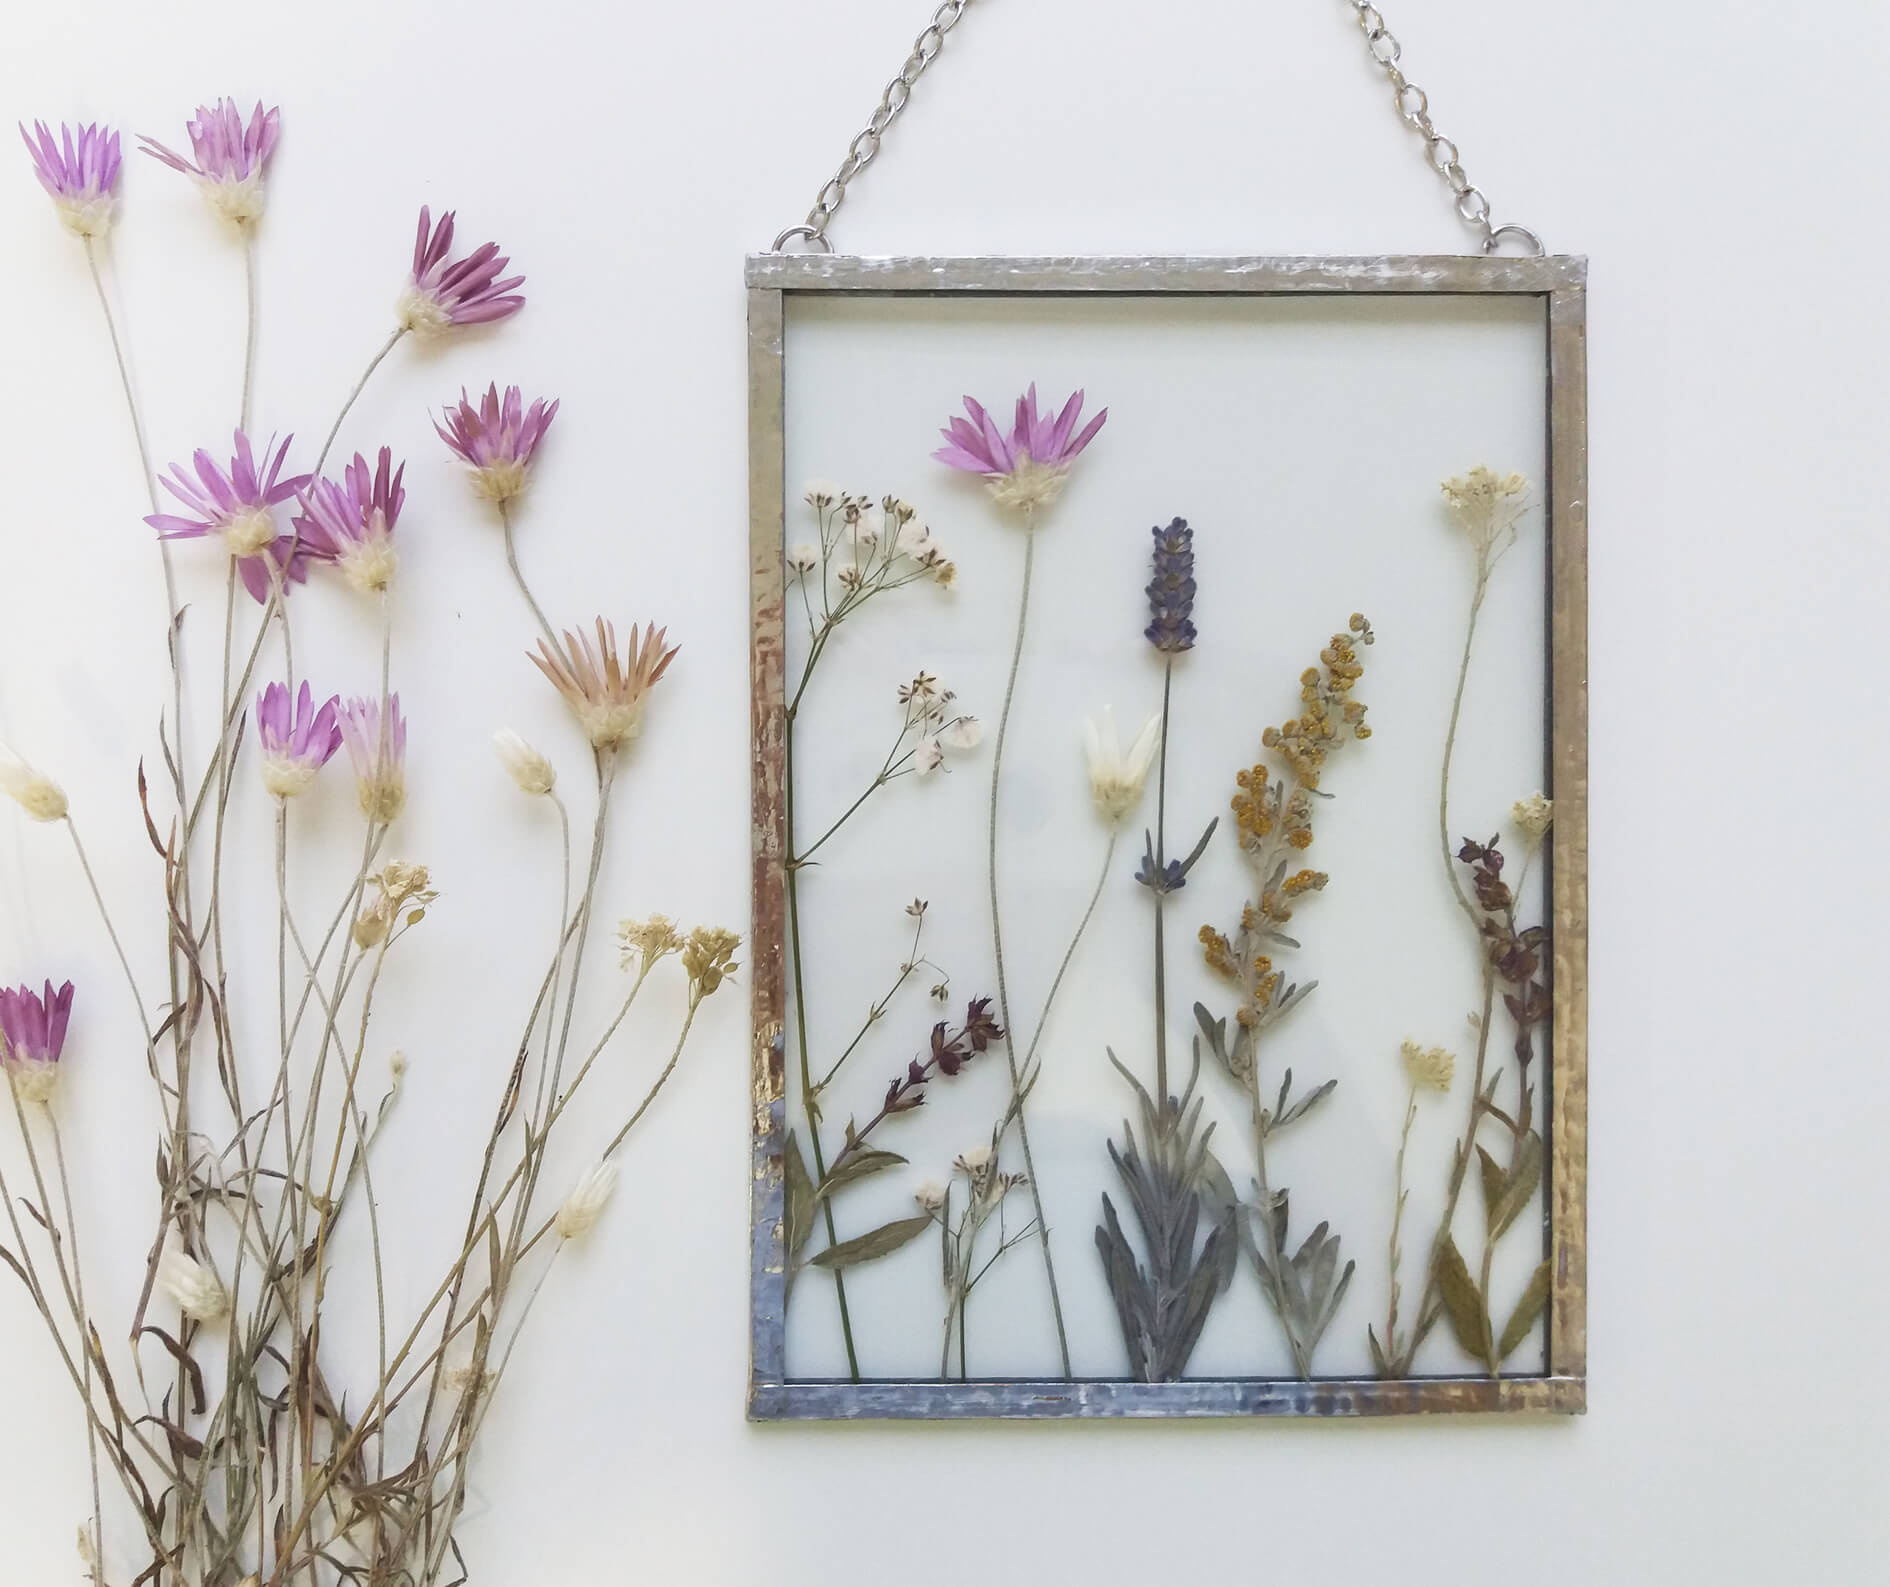 Framed dried flower art with dried wildflowers.